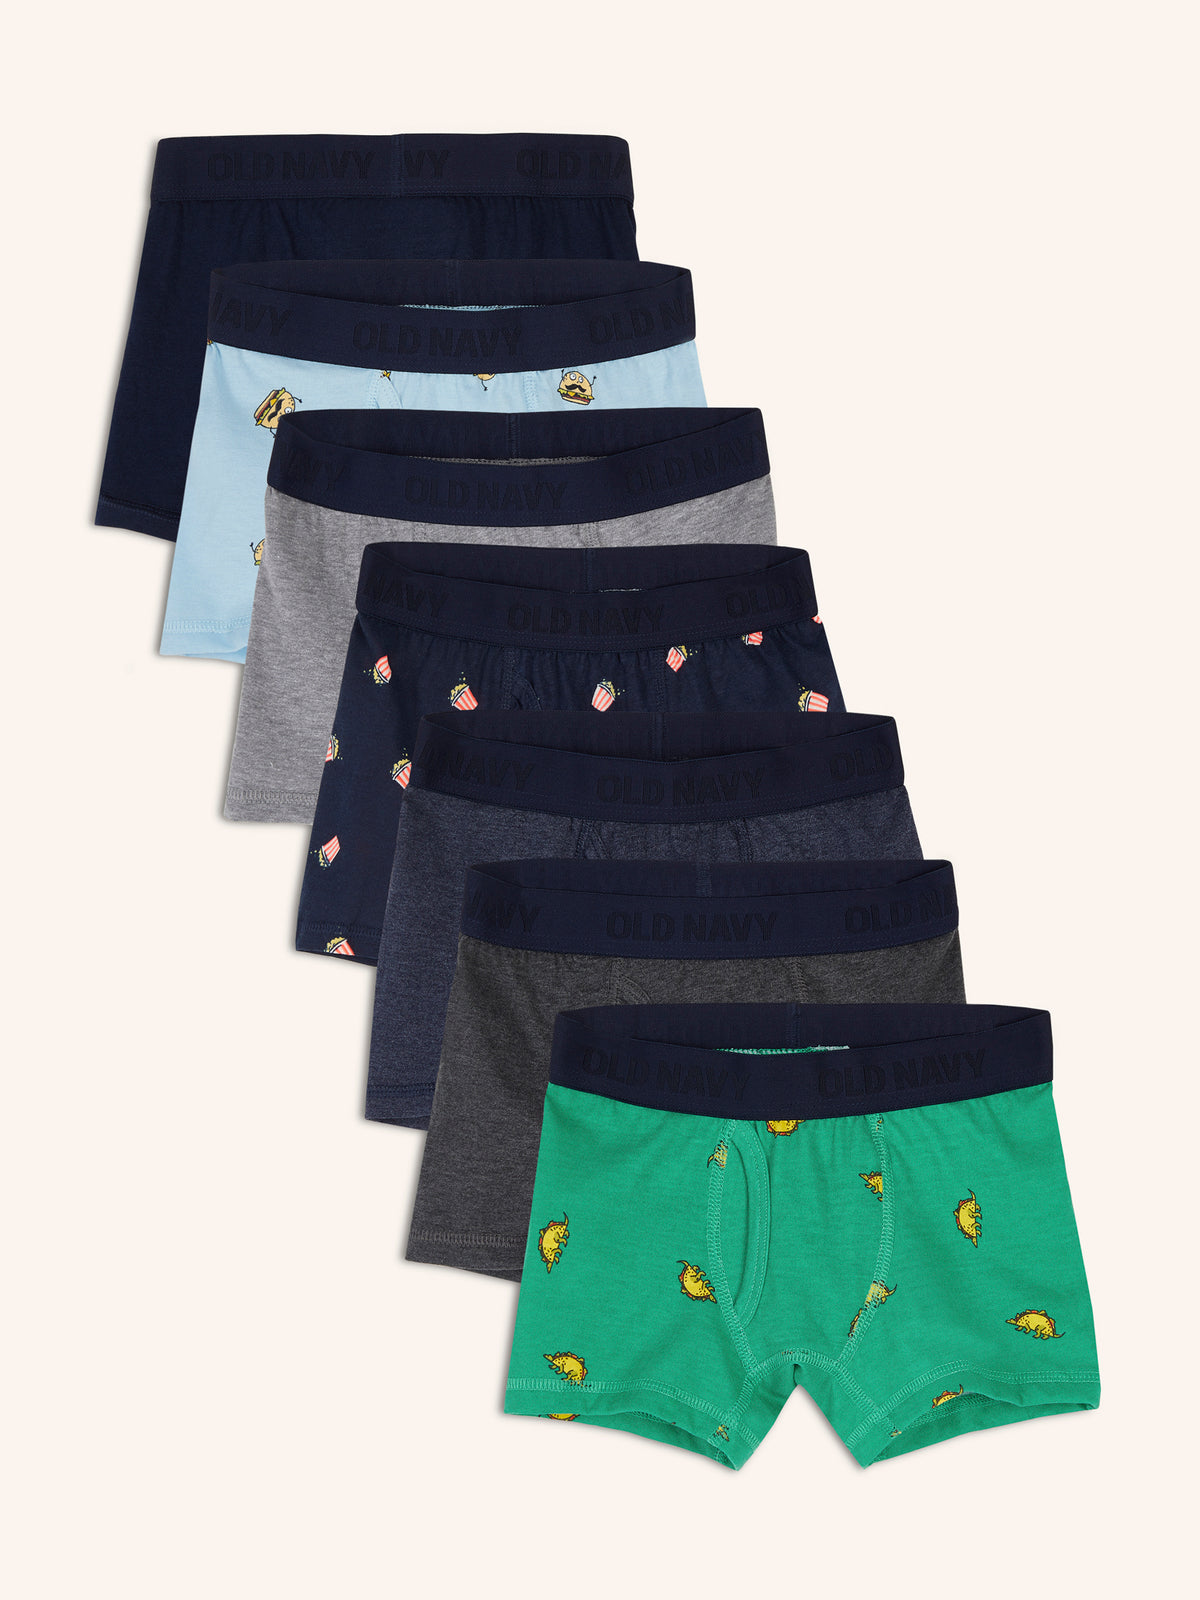 Old Navy - Printed Boxer-Briefs Underwear 7-Pack for Boys multi